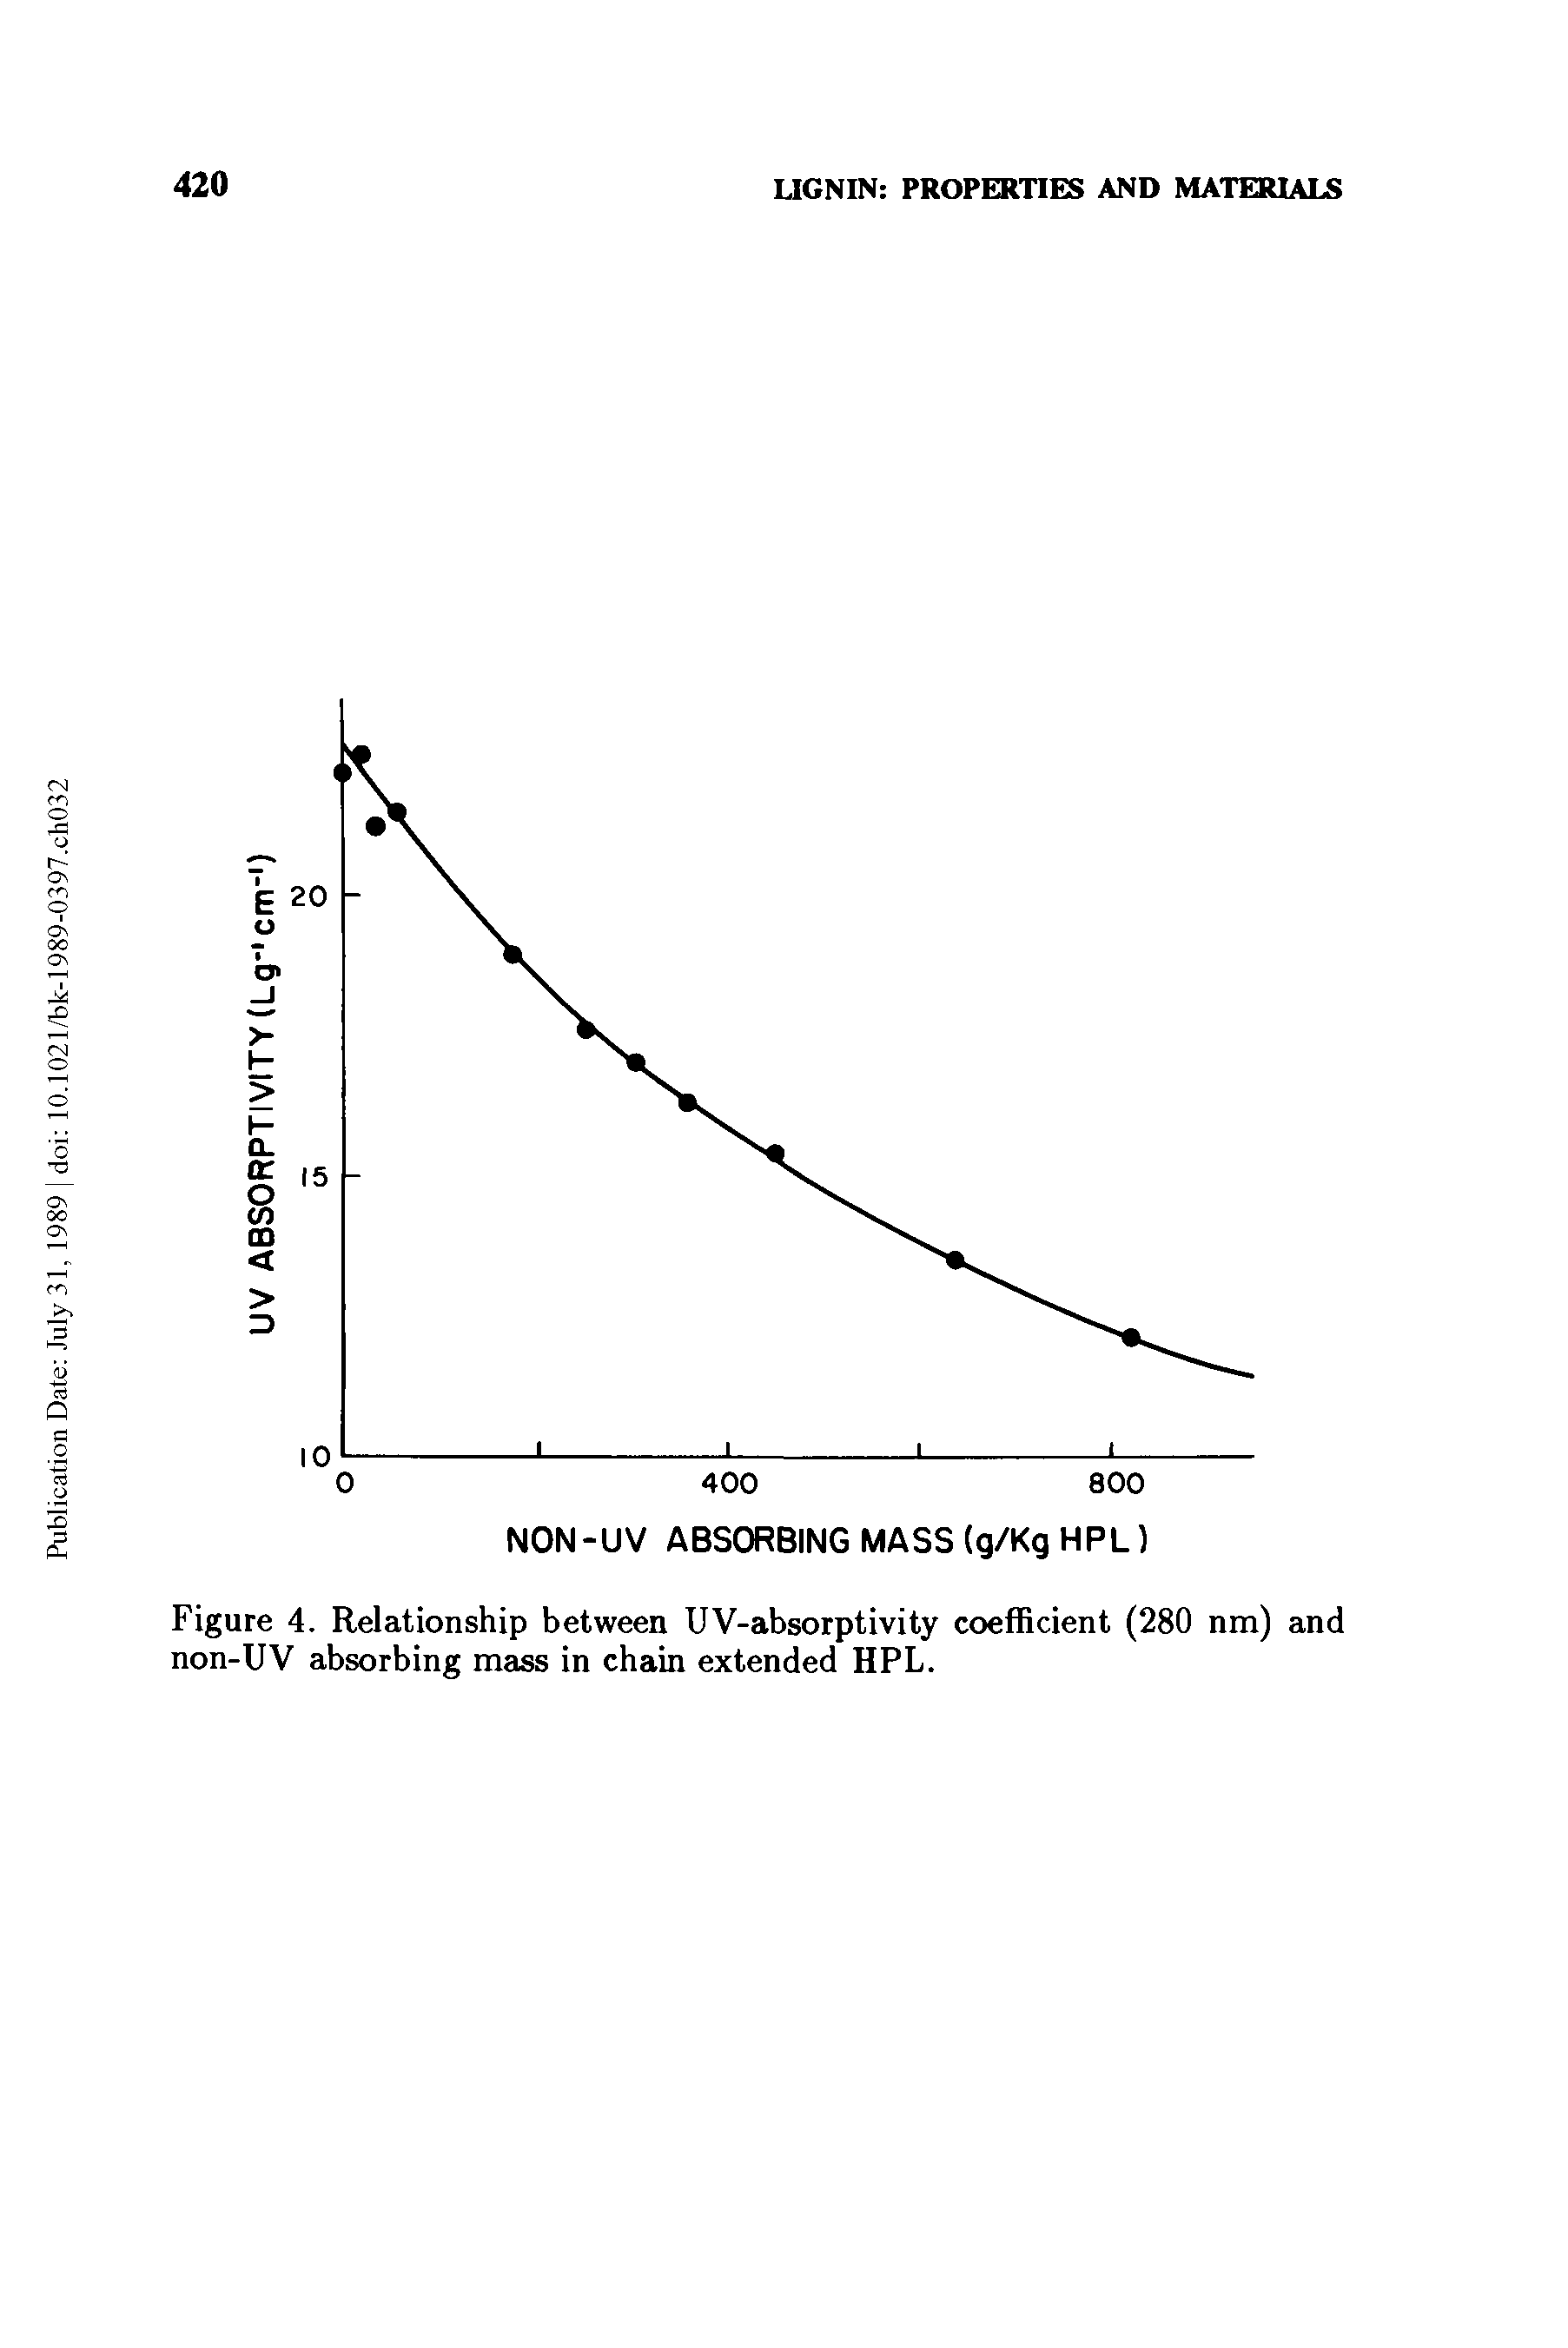 Figure 4. Relationship between UV-absorptivity coefficient (280 nm) and non-UV absorbing mass in chain extended HPL.